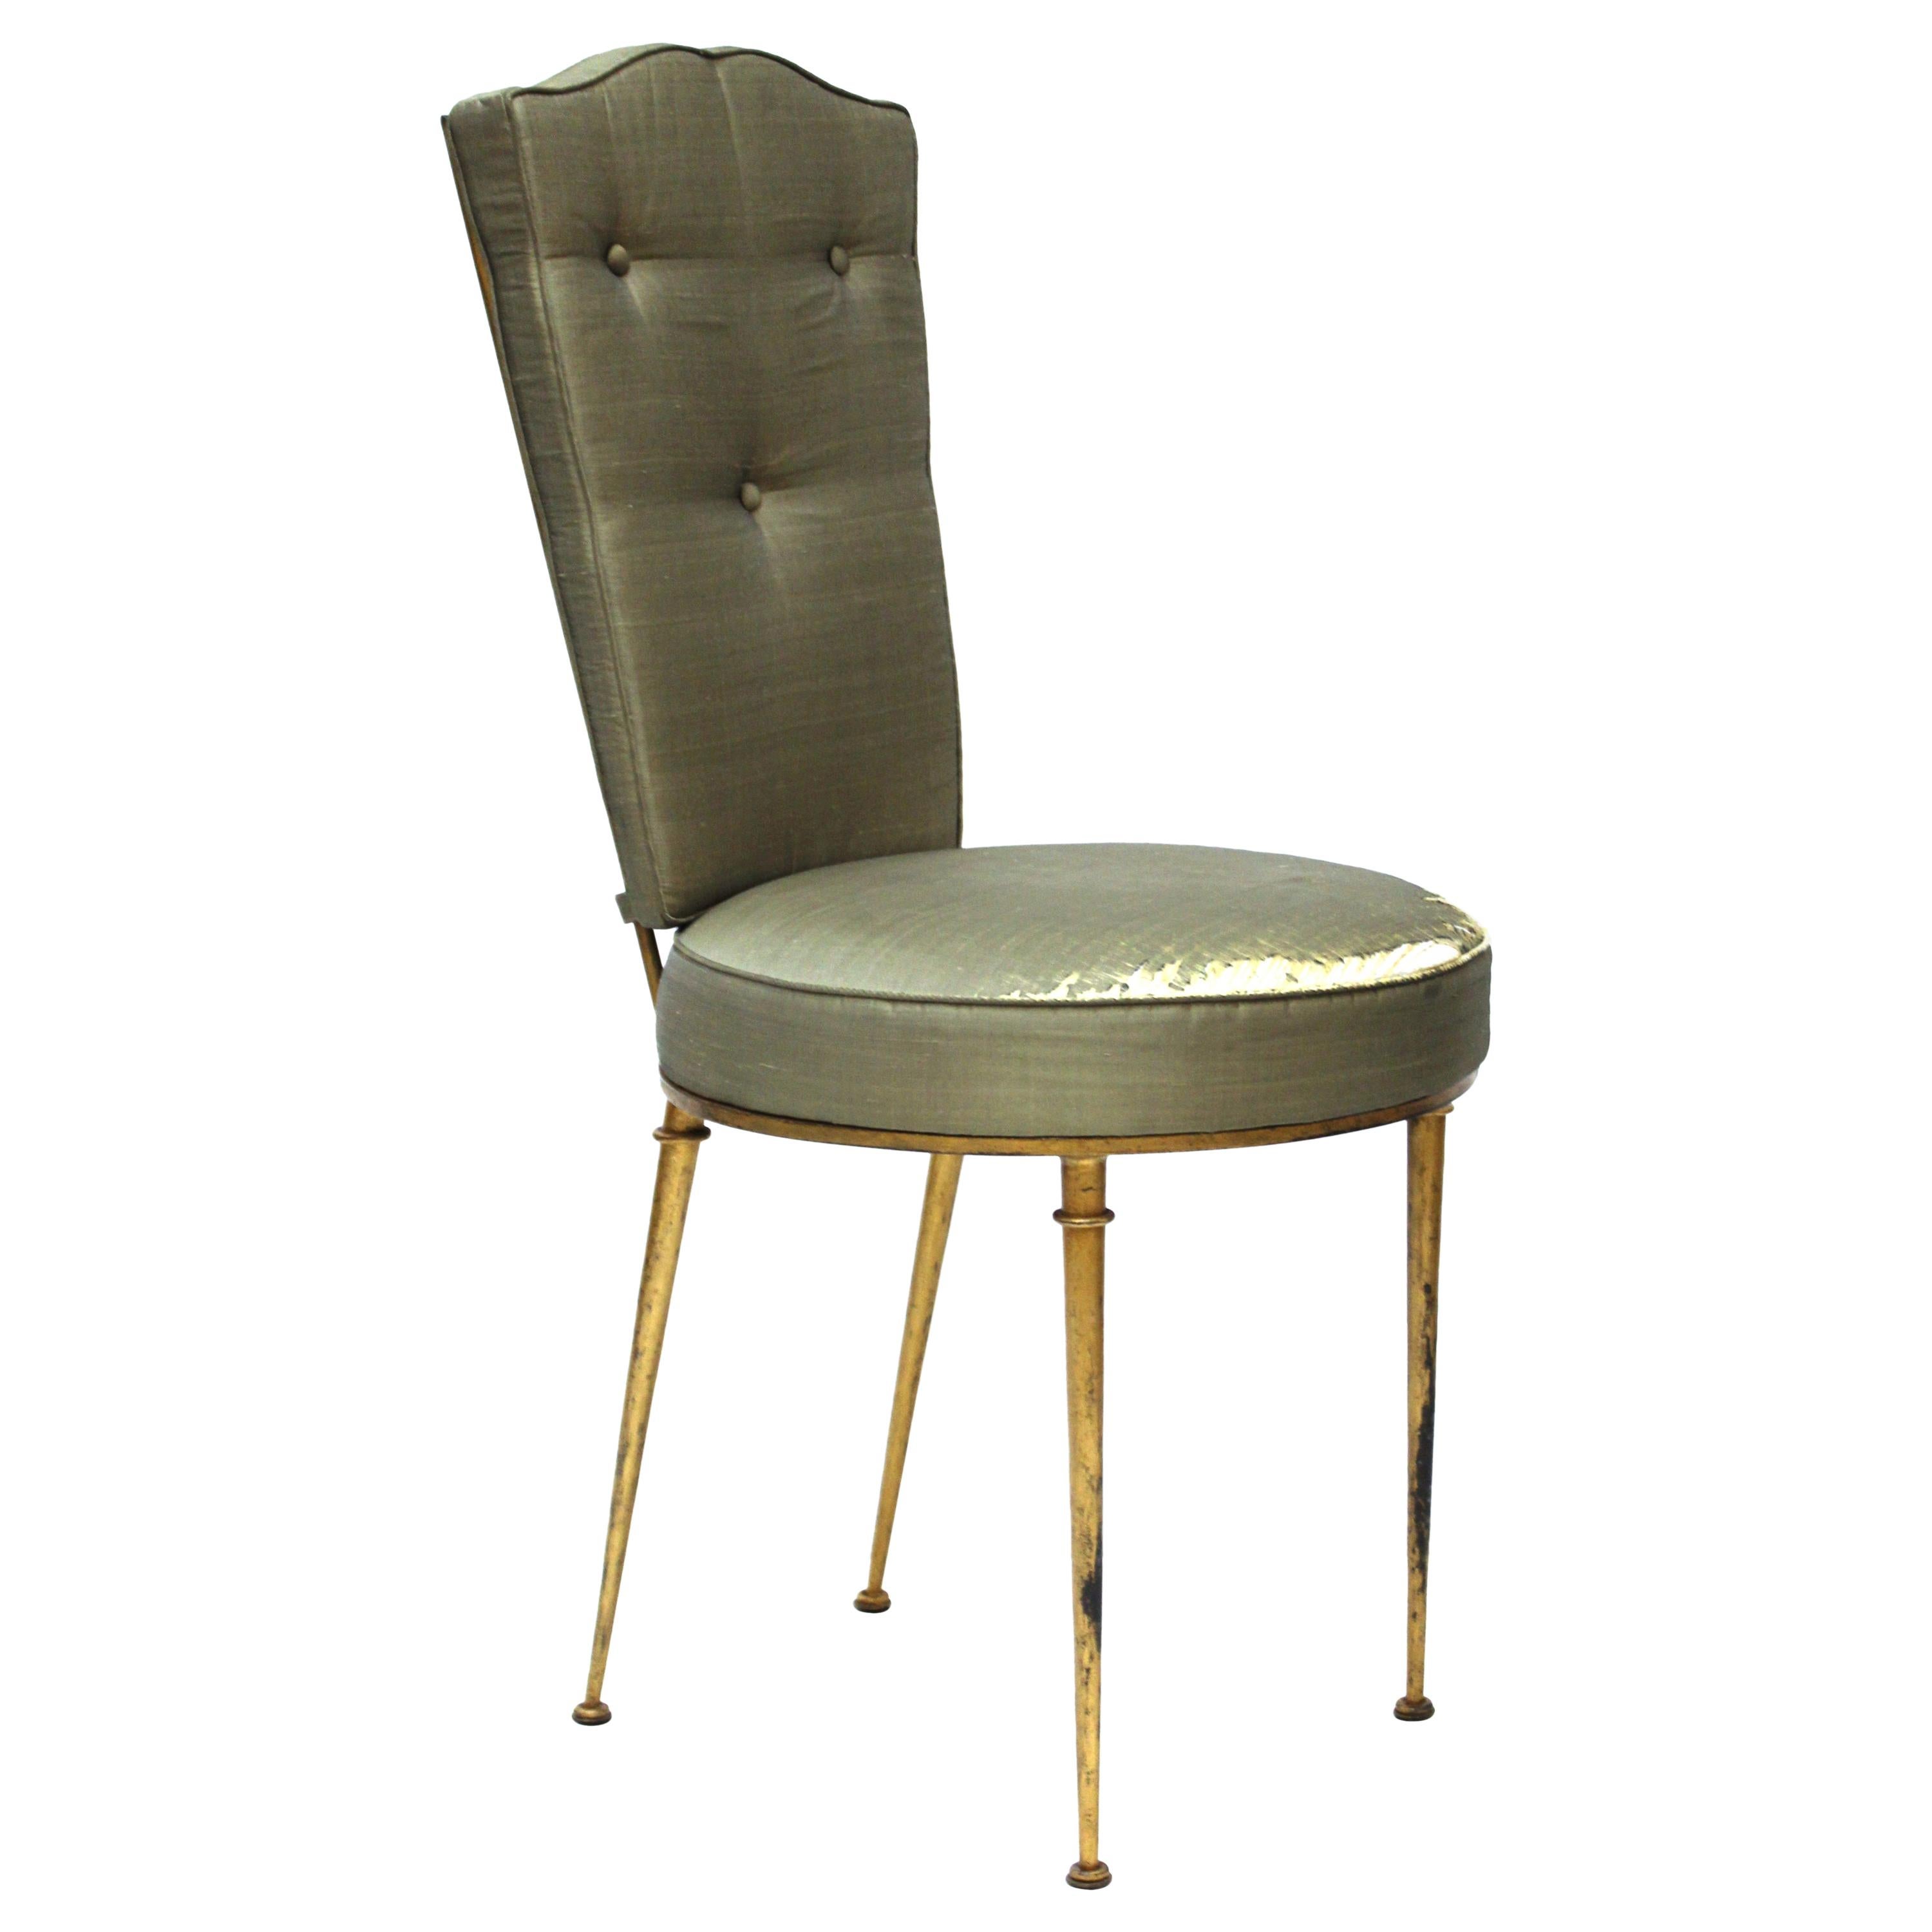 Rene Prou French Mid-Century Modern Side Chair or Vanity Chair in Gilt Metal